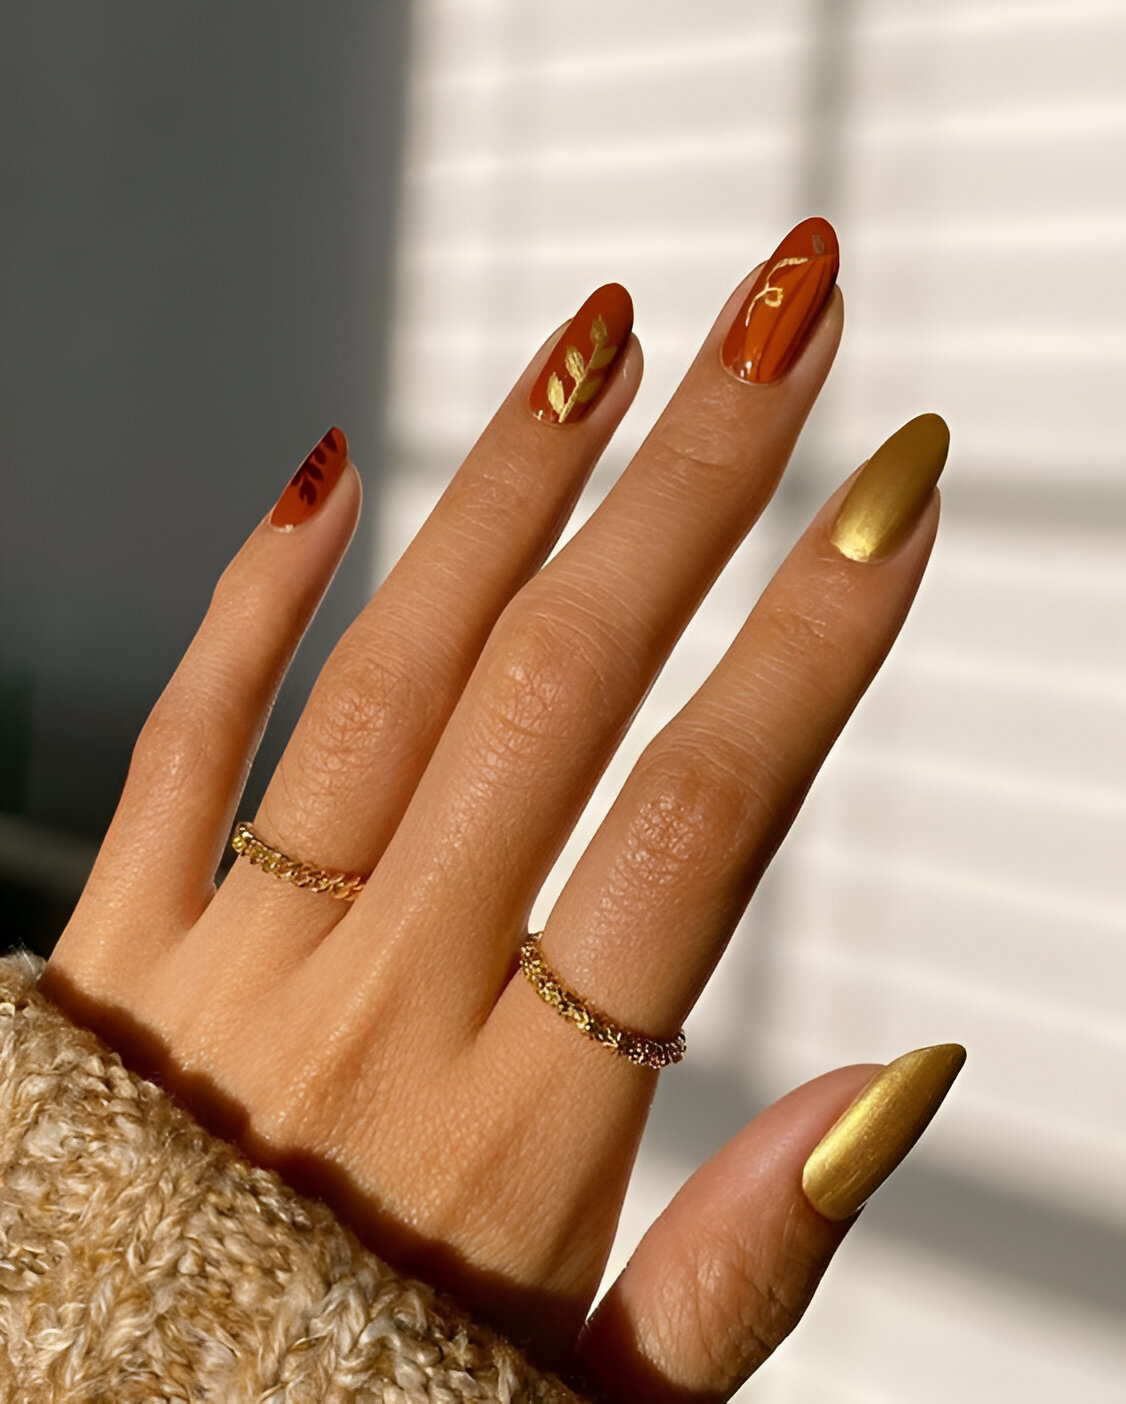 Chic Orange And Gold Nails